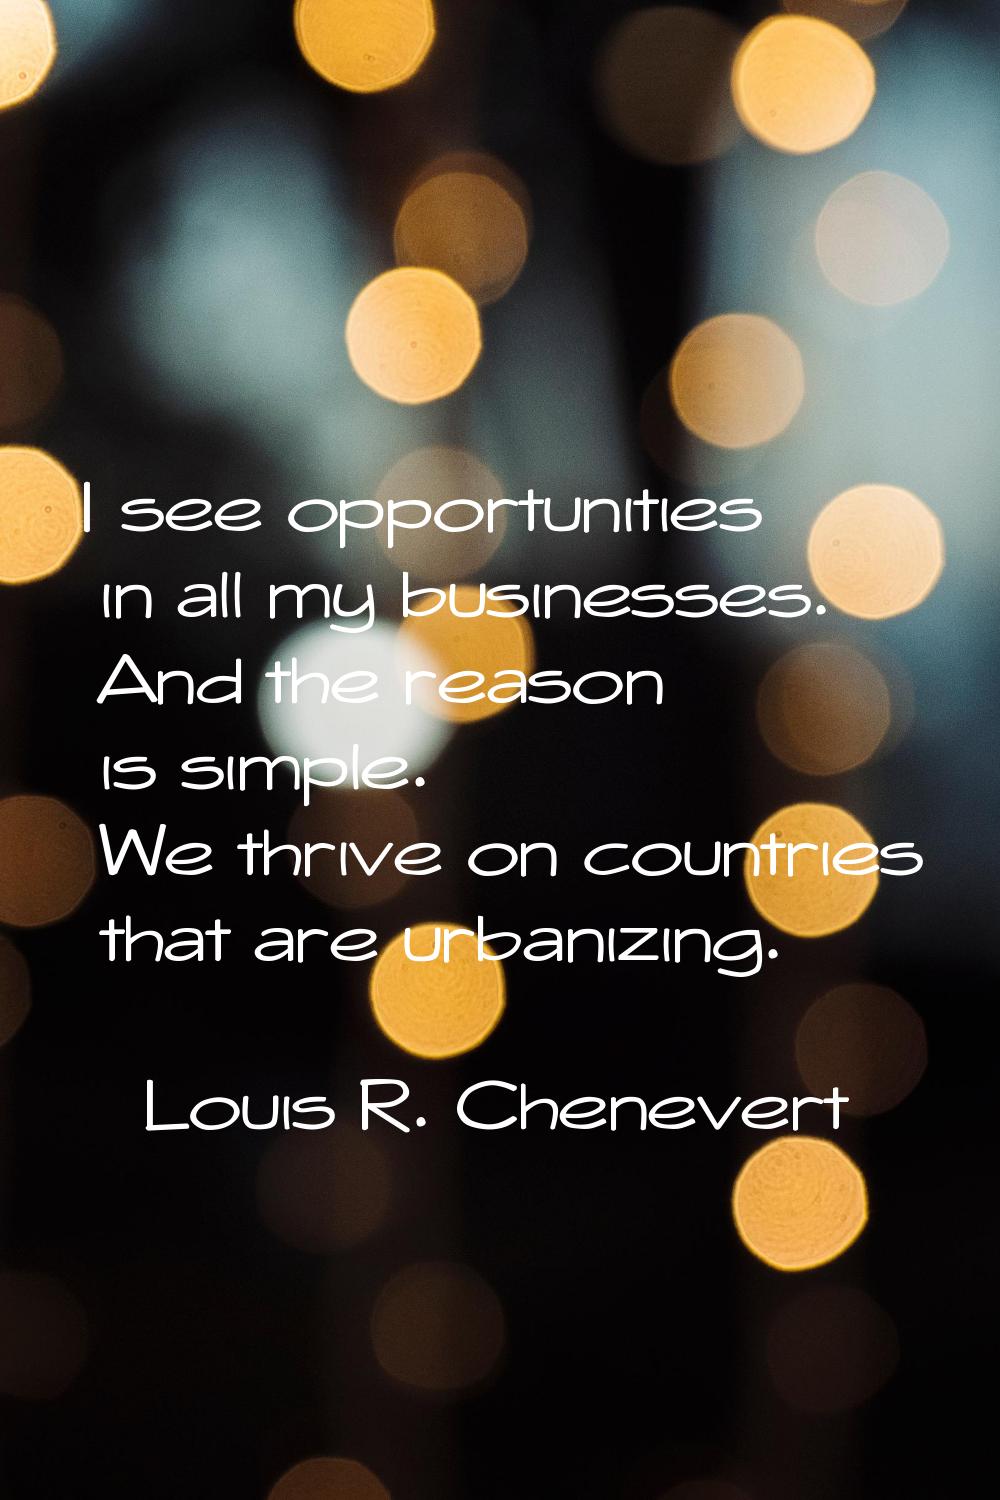 I see opportunities in all my businesses. And the reason is simple. We thrive on countries that are